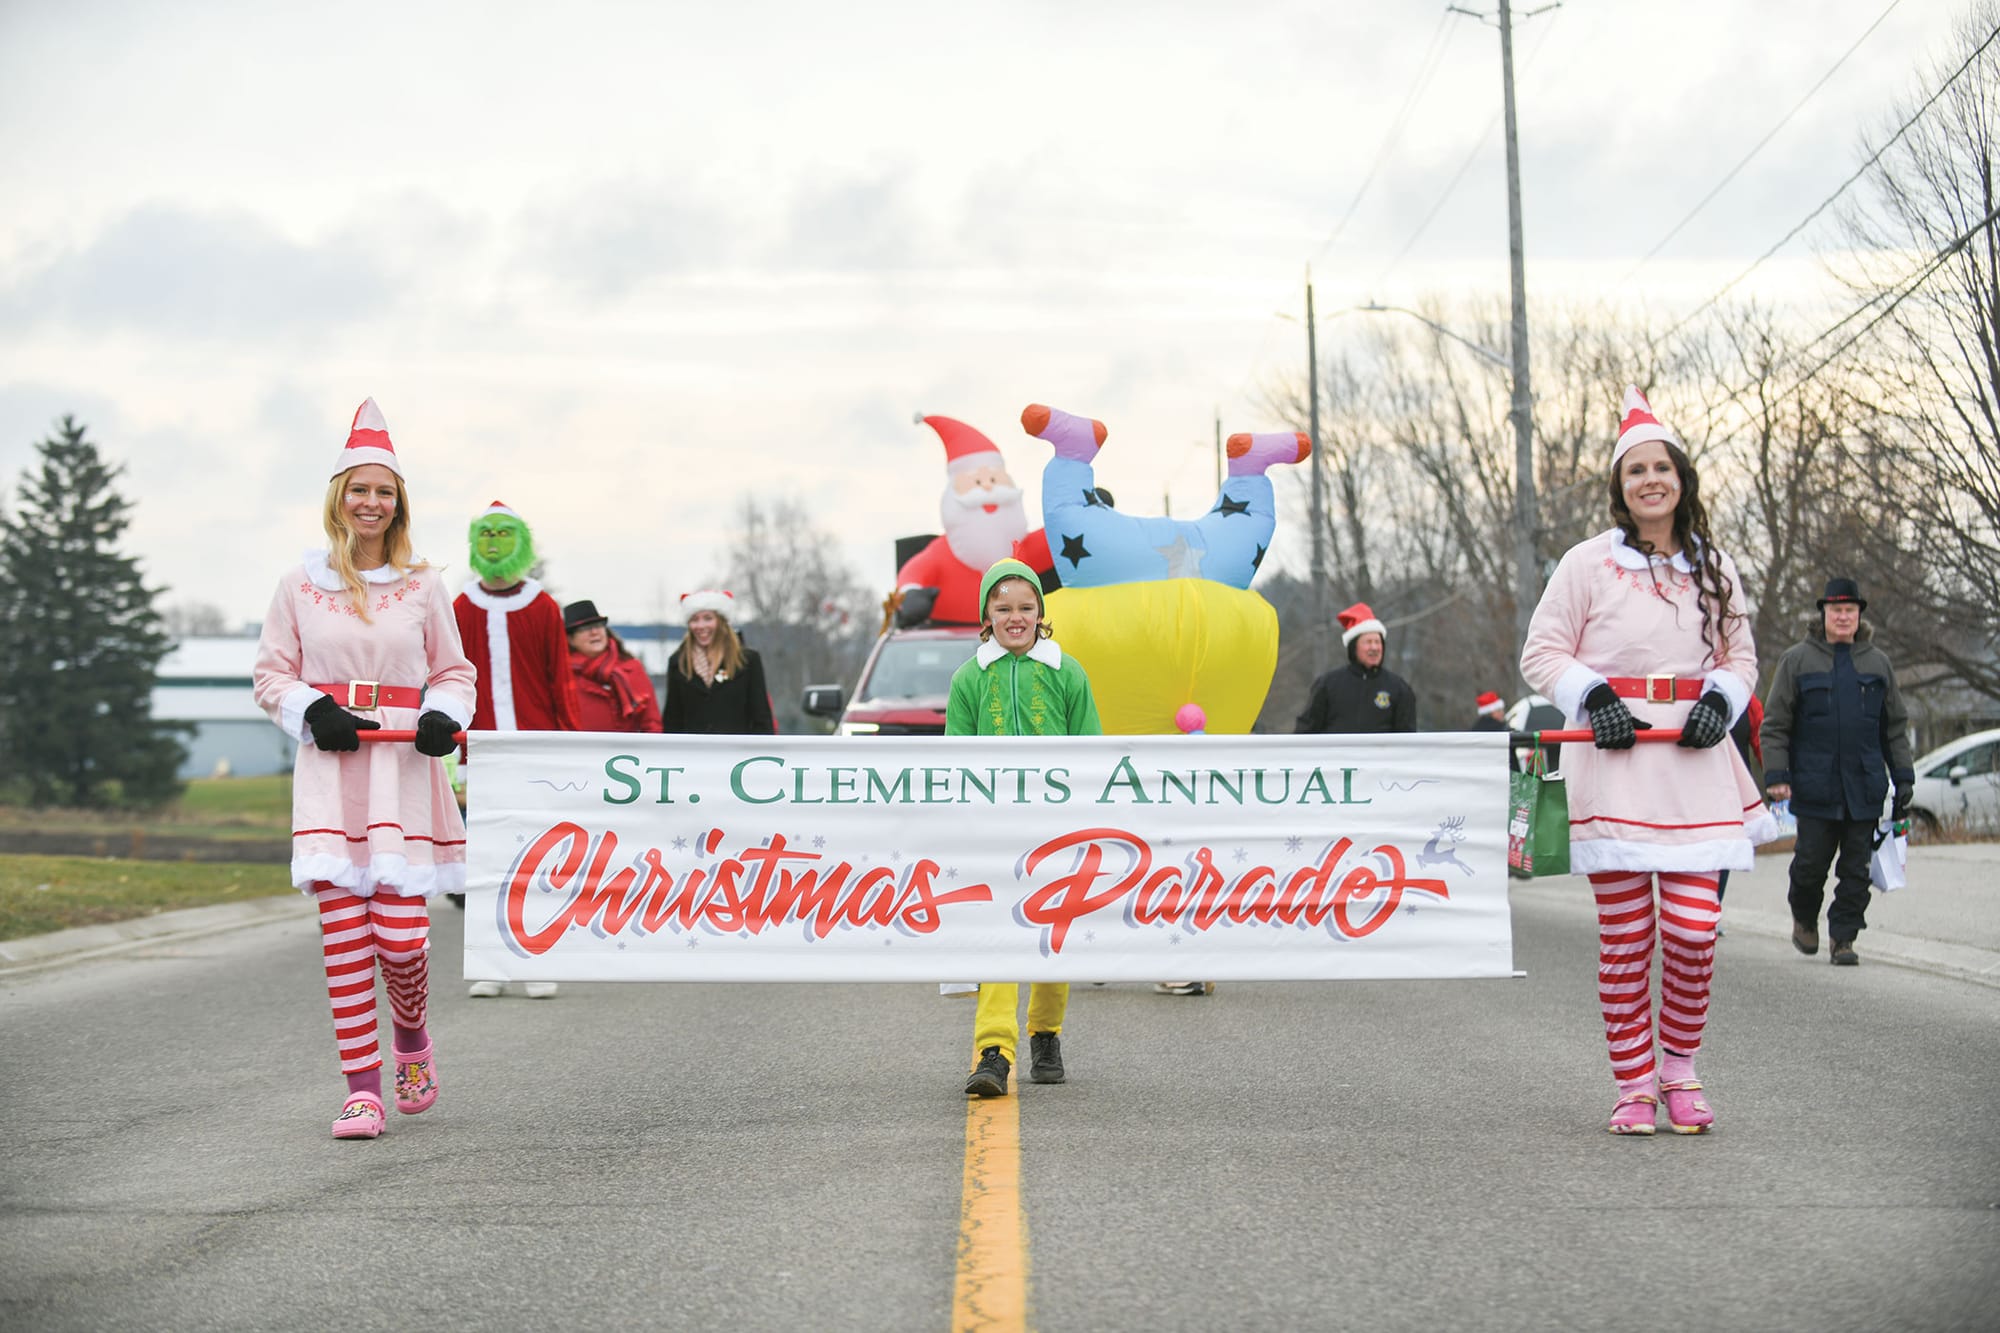                      St. Clements Annual Christmas Parade                             
                     